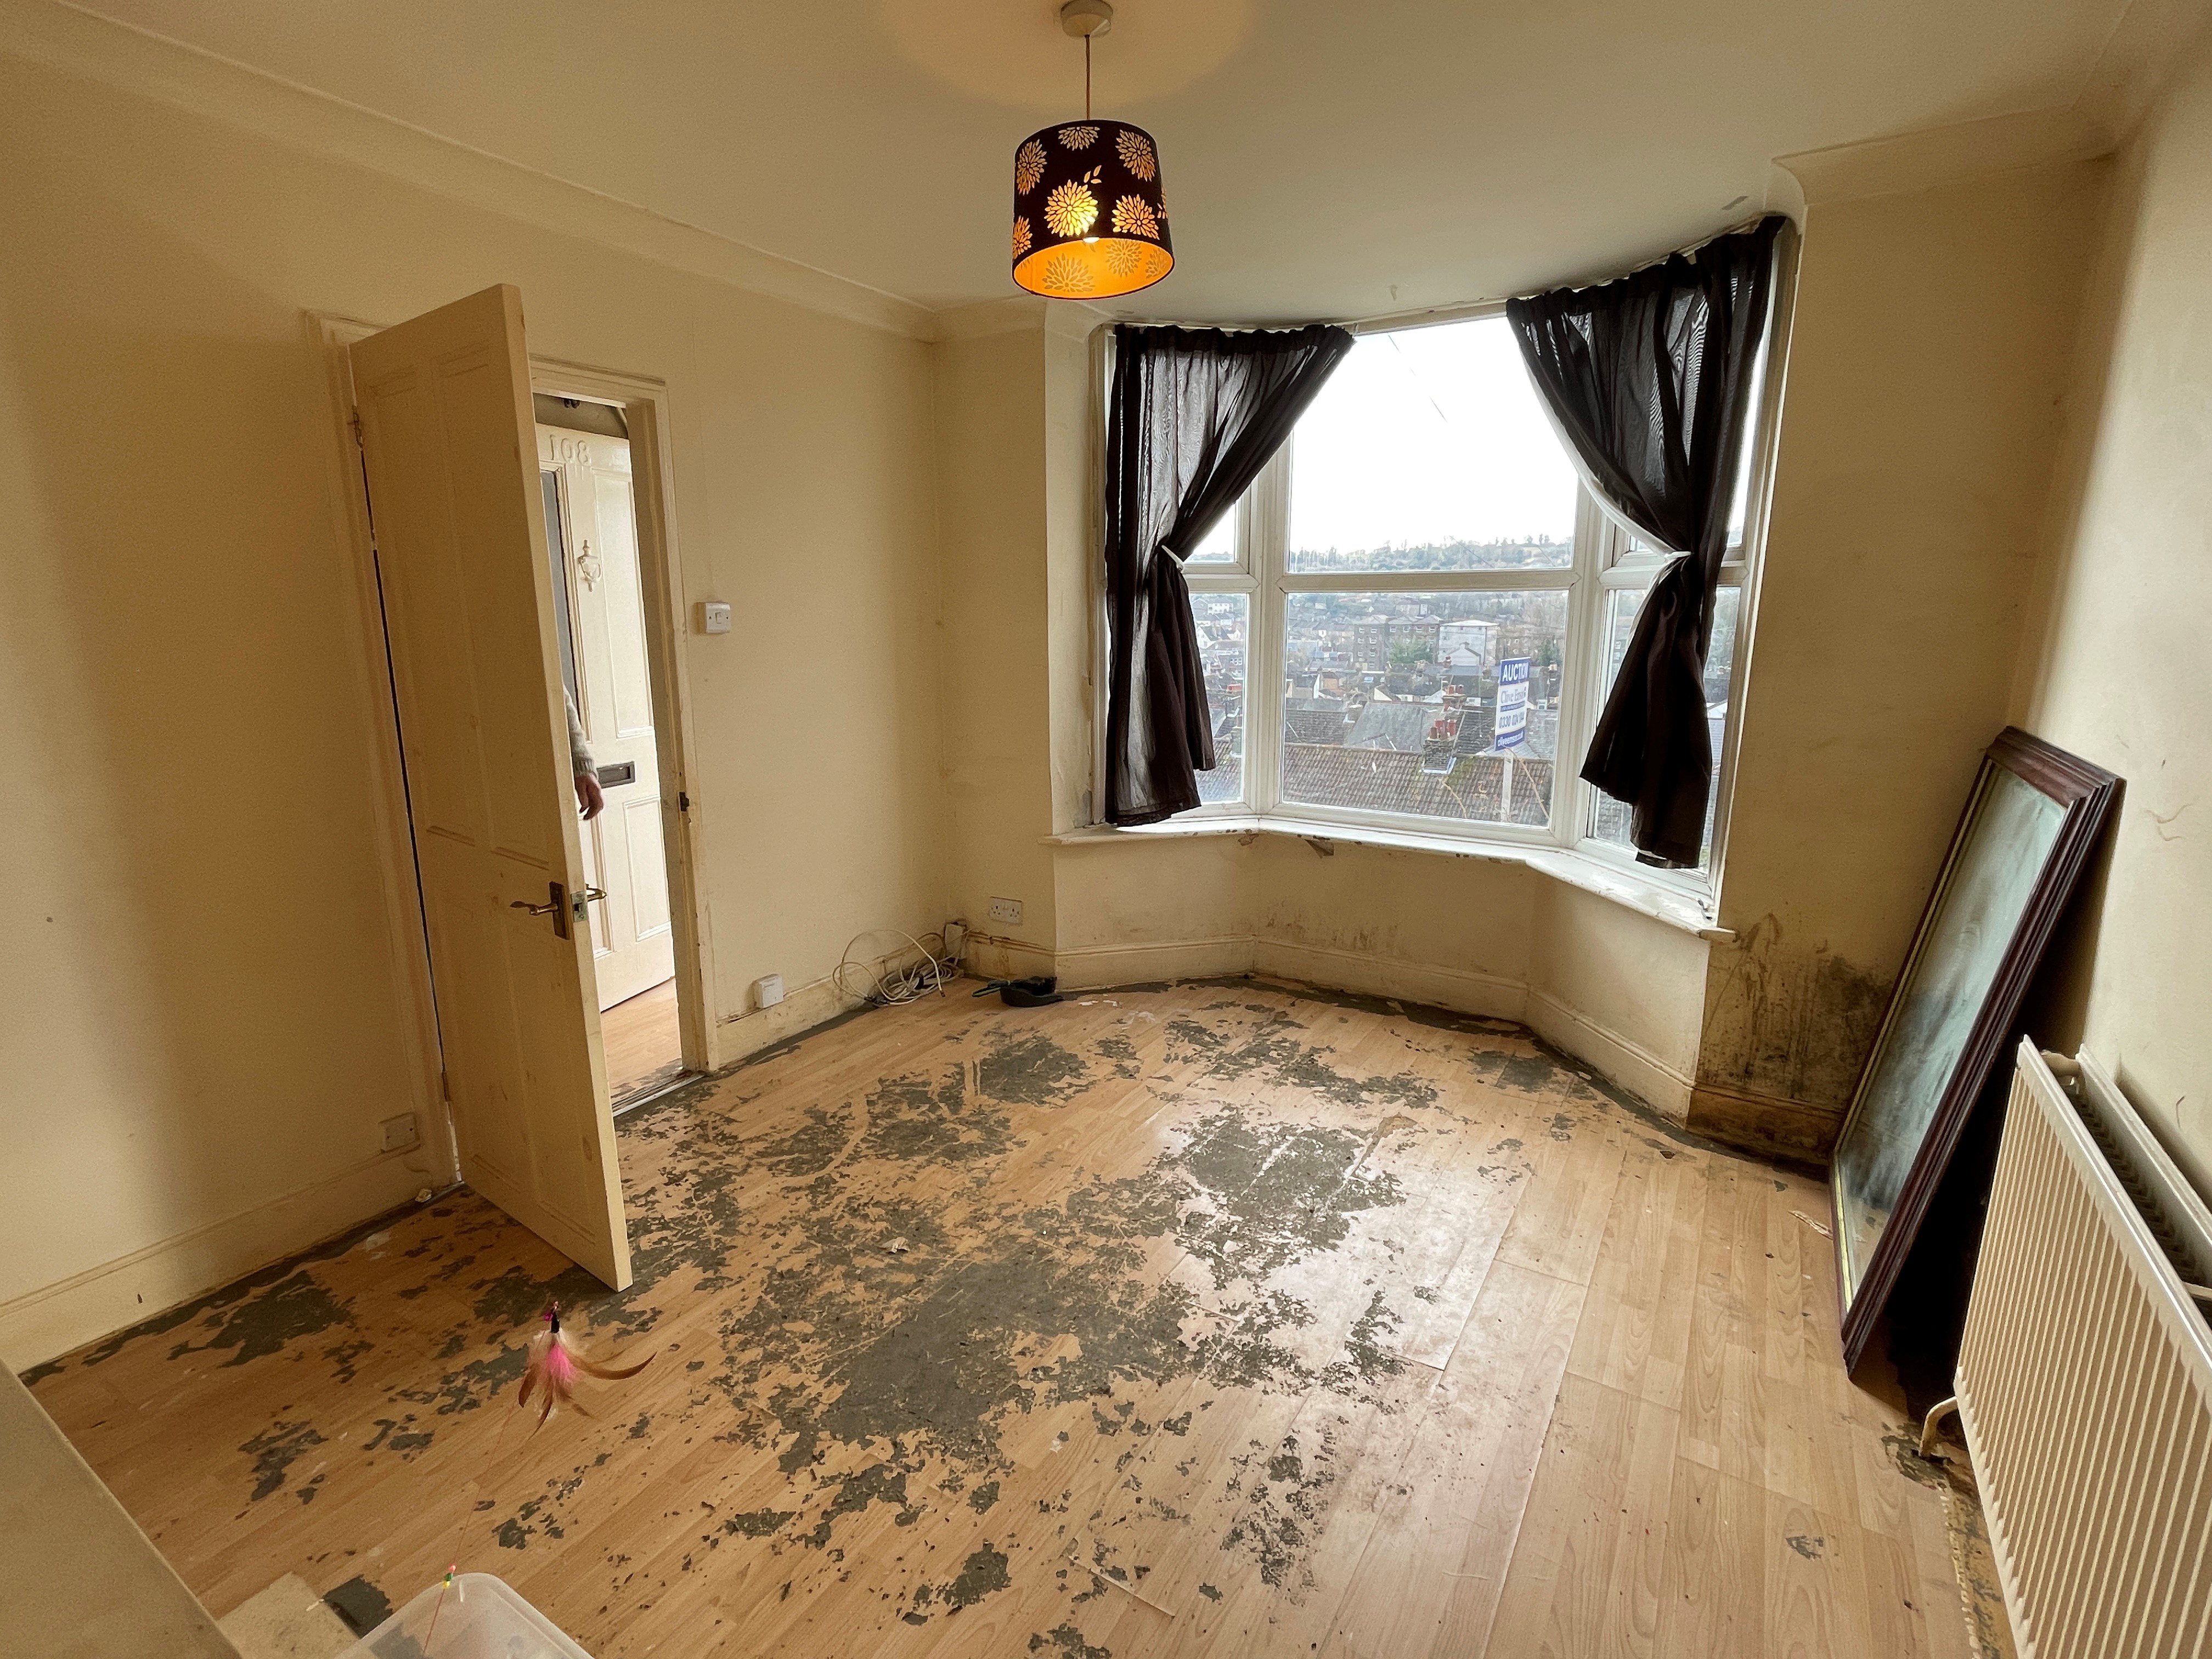 Lot: 92 - THREE-BEDROOM TERRACED HOUSE WITH VIEWS - 